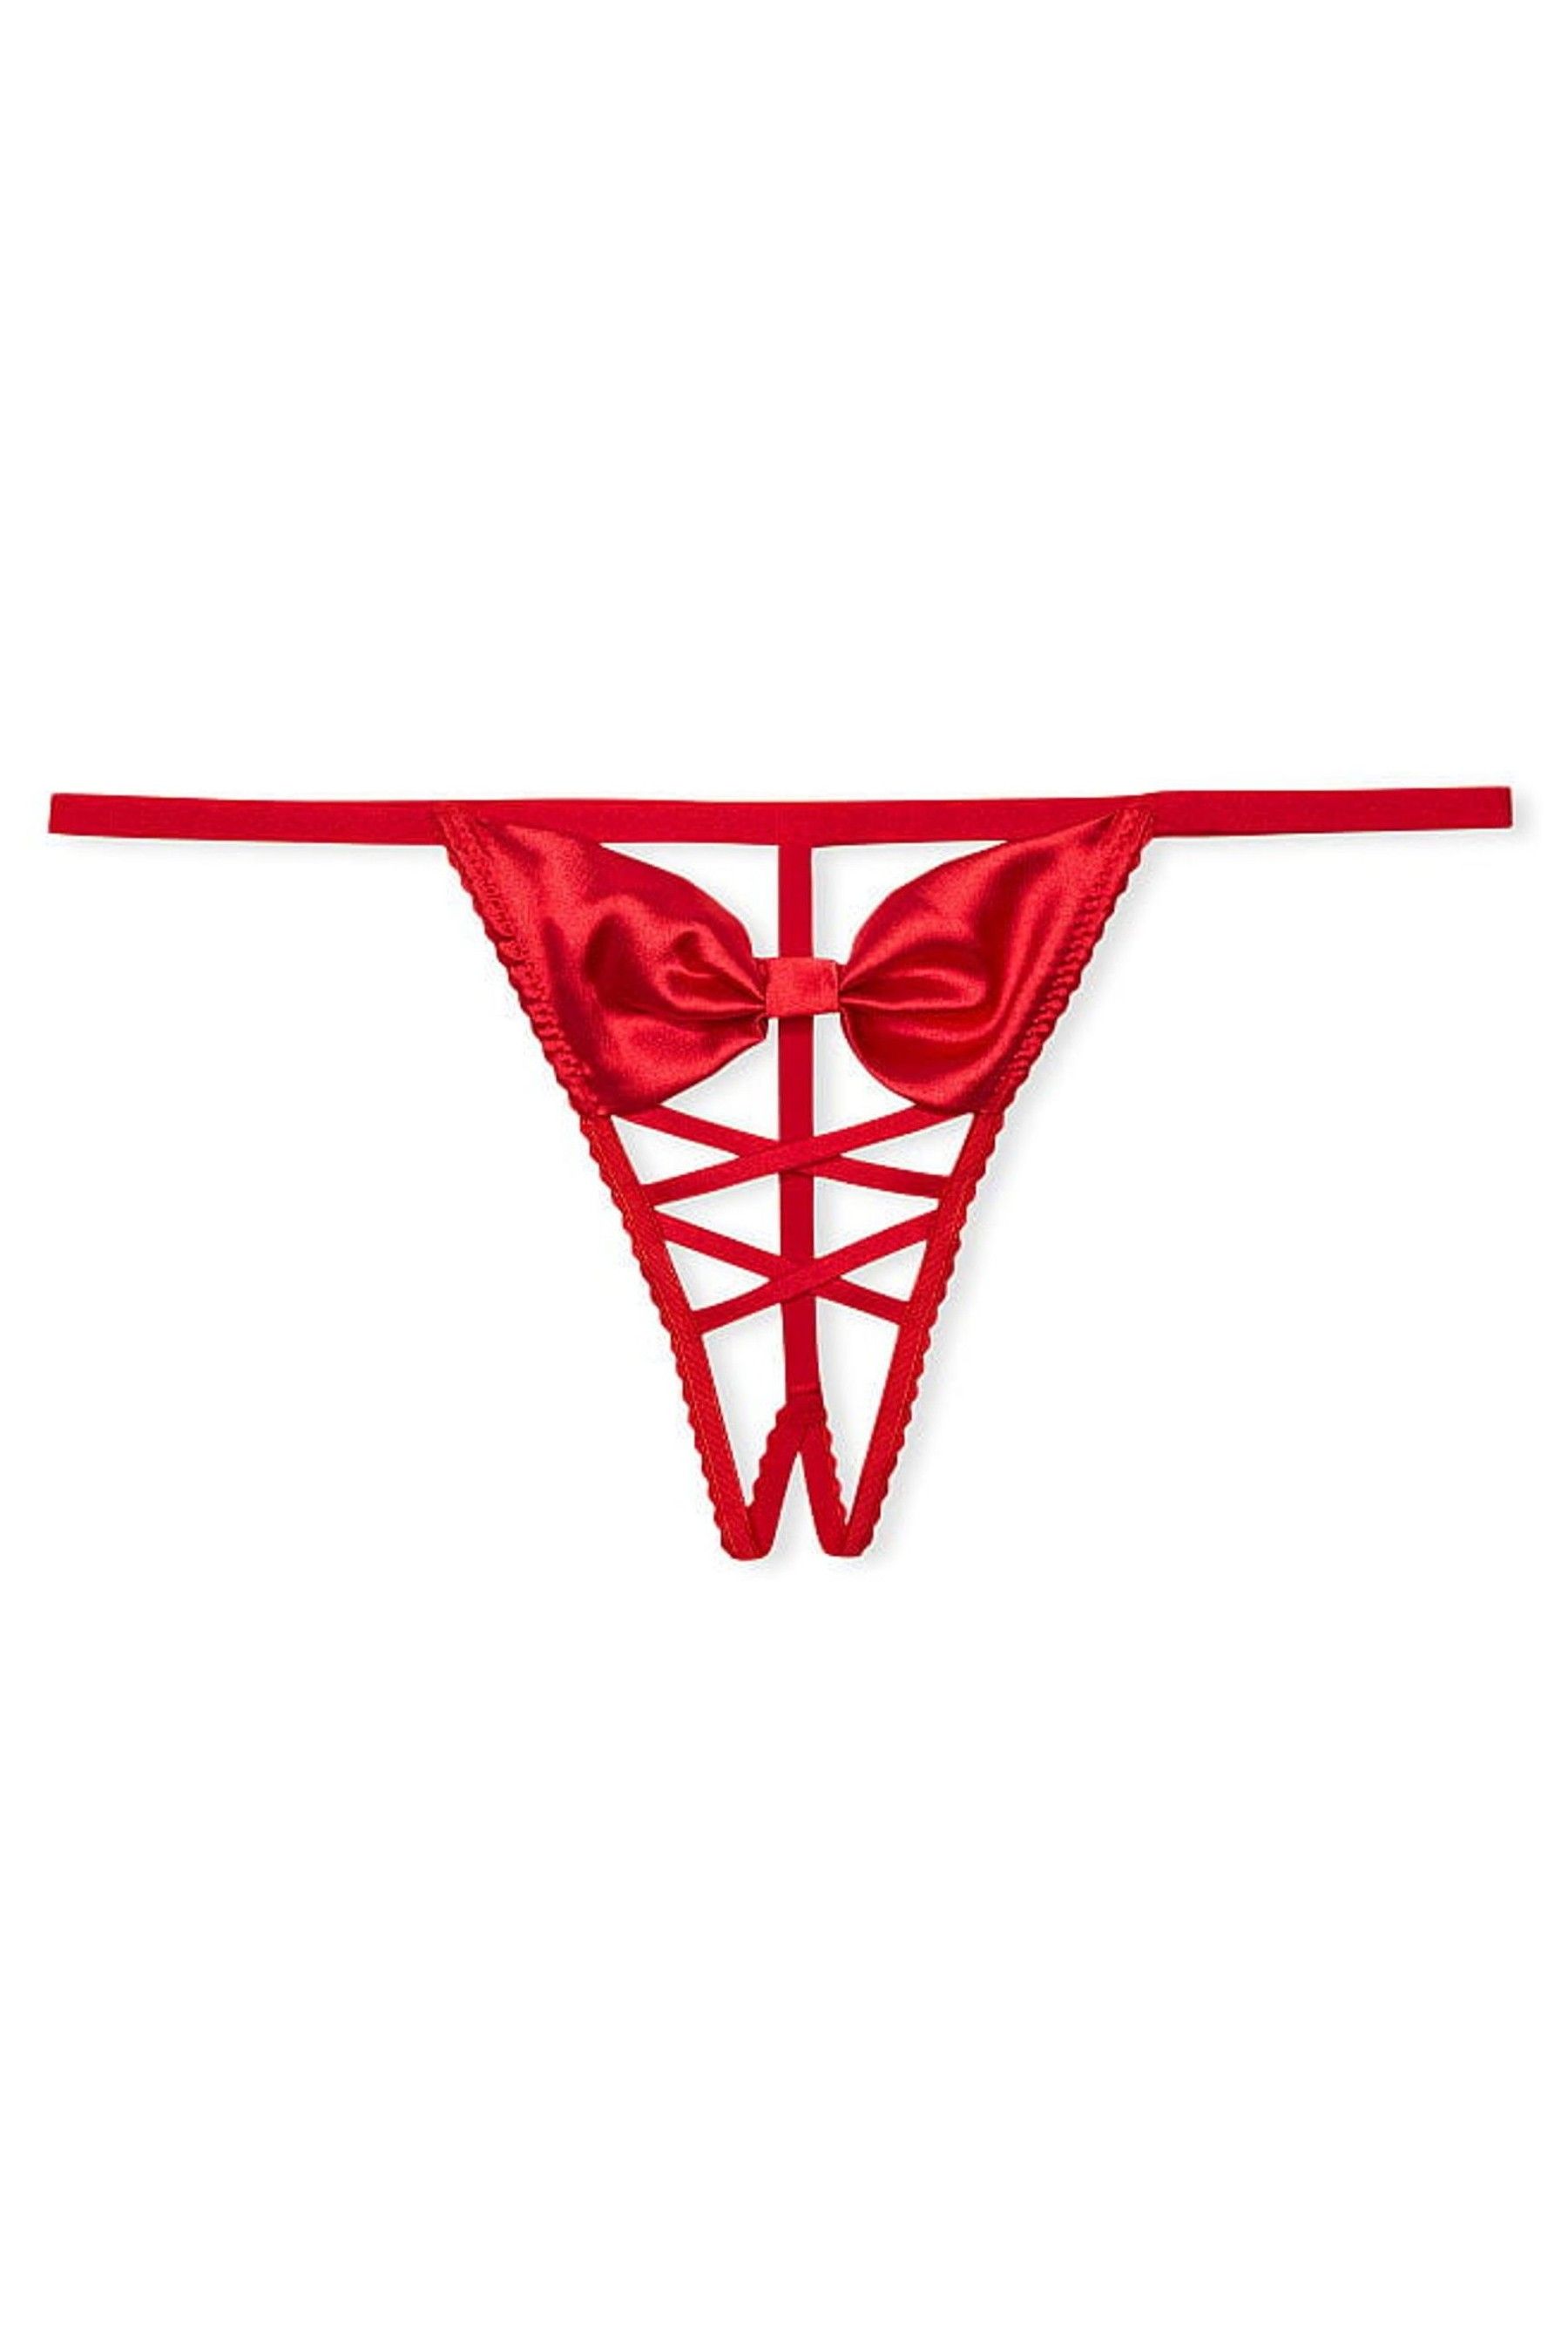 Buy Victoria S Secret Very Sexy Bow Lace Up G String Knickers From The Victoria S Secret Uk